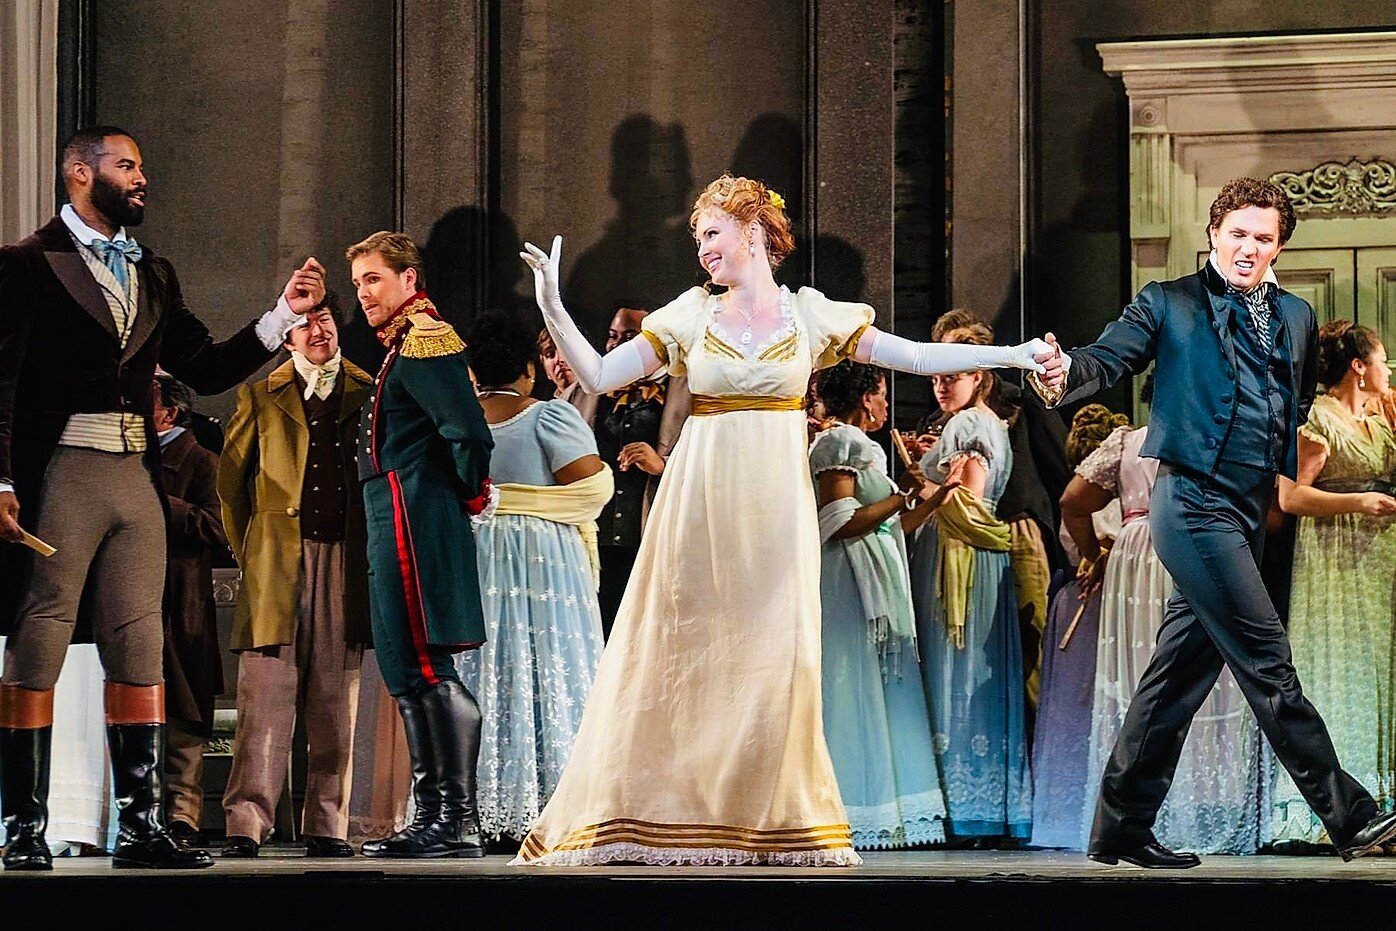  “Mezzo-soprano  Carolyn Sproule  was breathtaking as Olga. Her voice lush and dark, and phenomenally powerful, even at her lowest range. As one of the few non-Russian principals, one would think she’d be at a disadvantage, but her diction was so fla